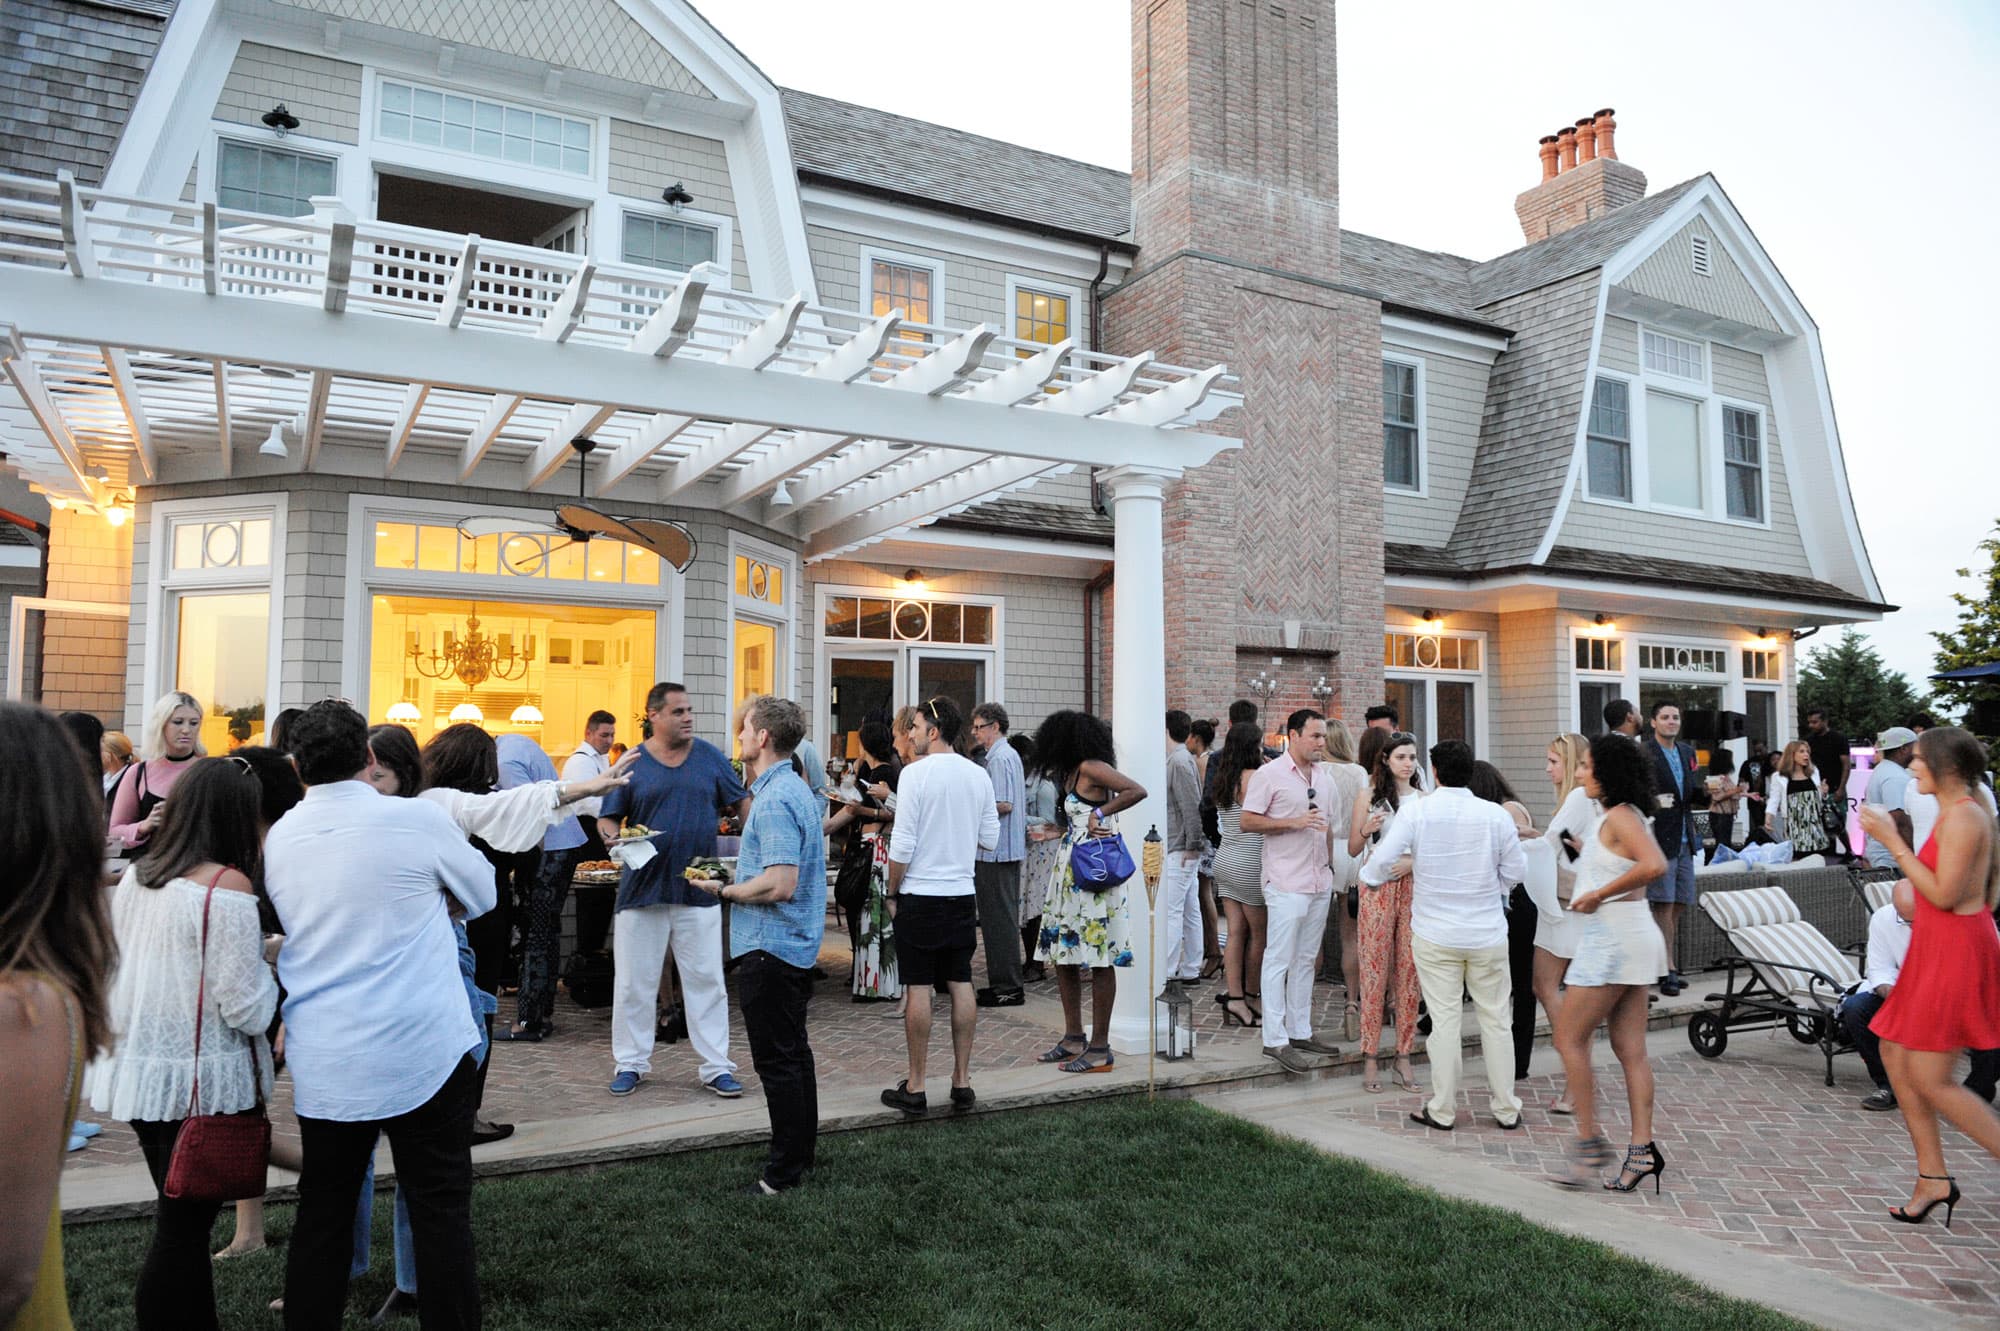 New York’s Ritzy Hamptons Plays Host to Over a Dozen Political Fundraisers This Month as Midterms Approach – NBC Connecticut